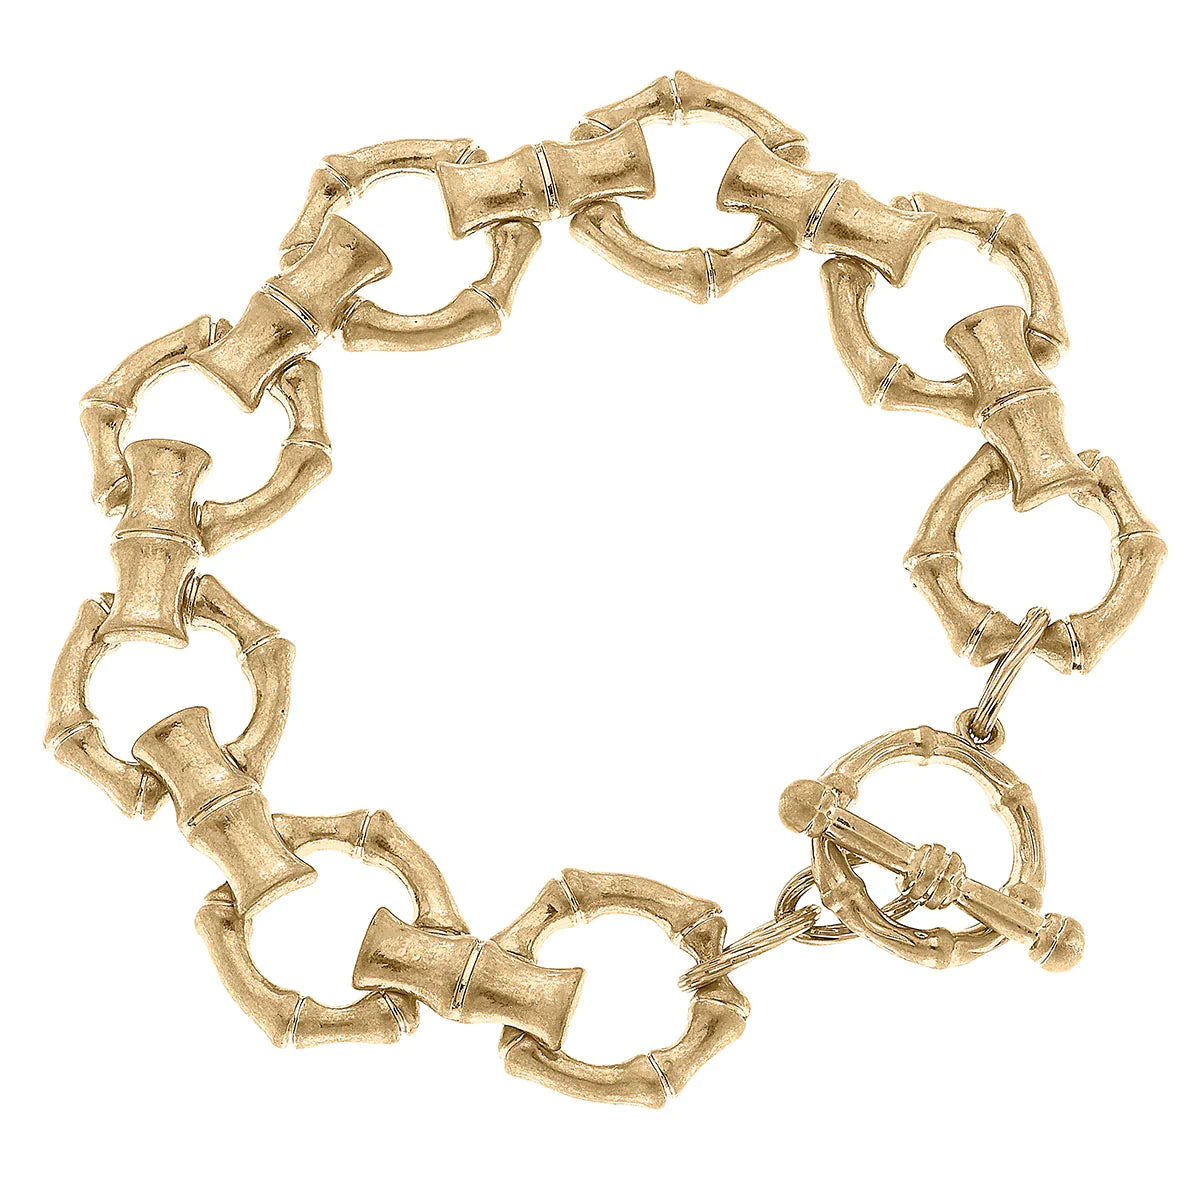 Ryleigh Bamboo Linked T-Bar Bracelet in Worn Gold